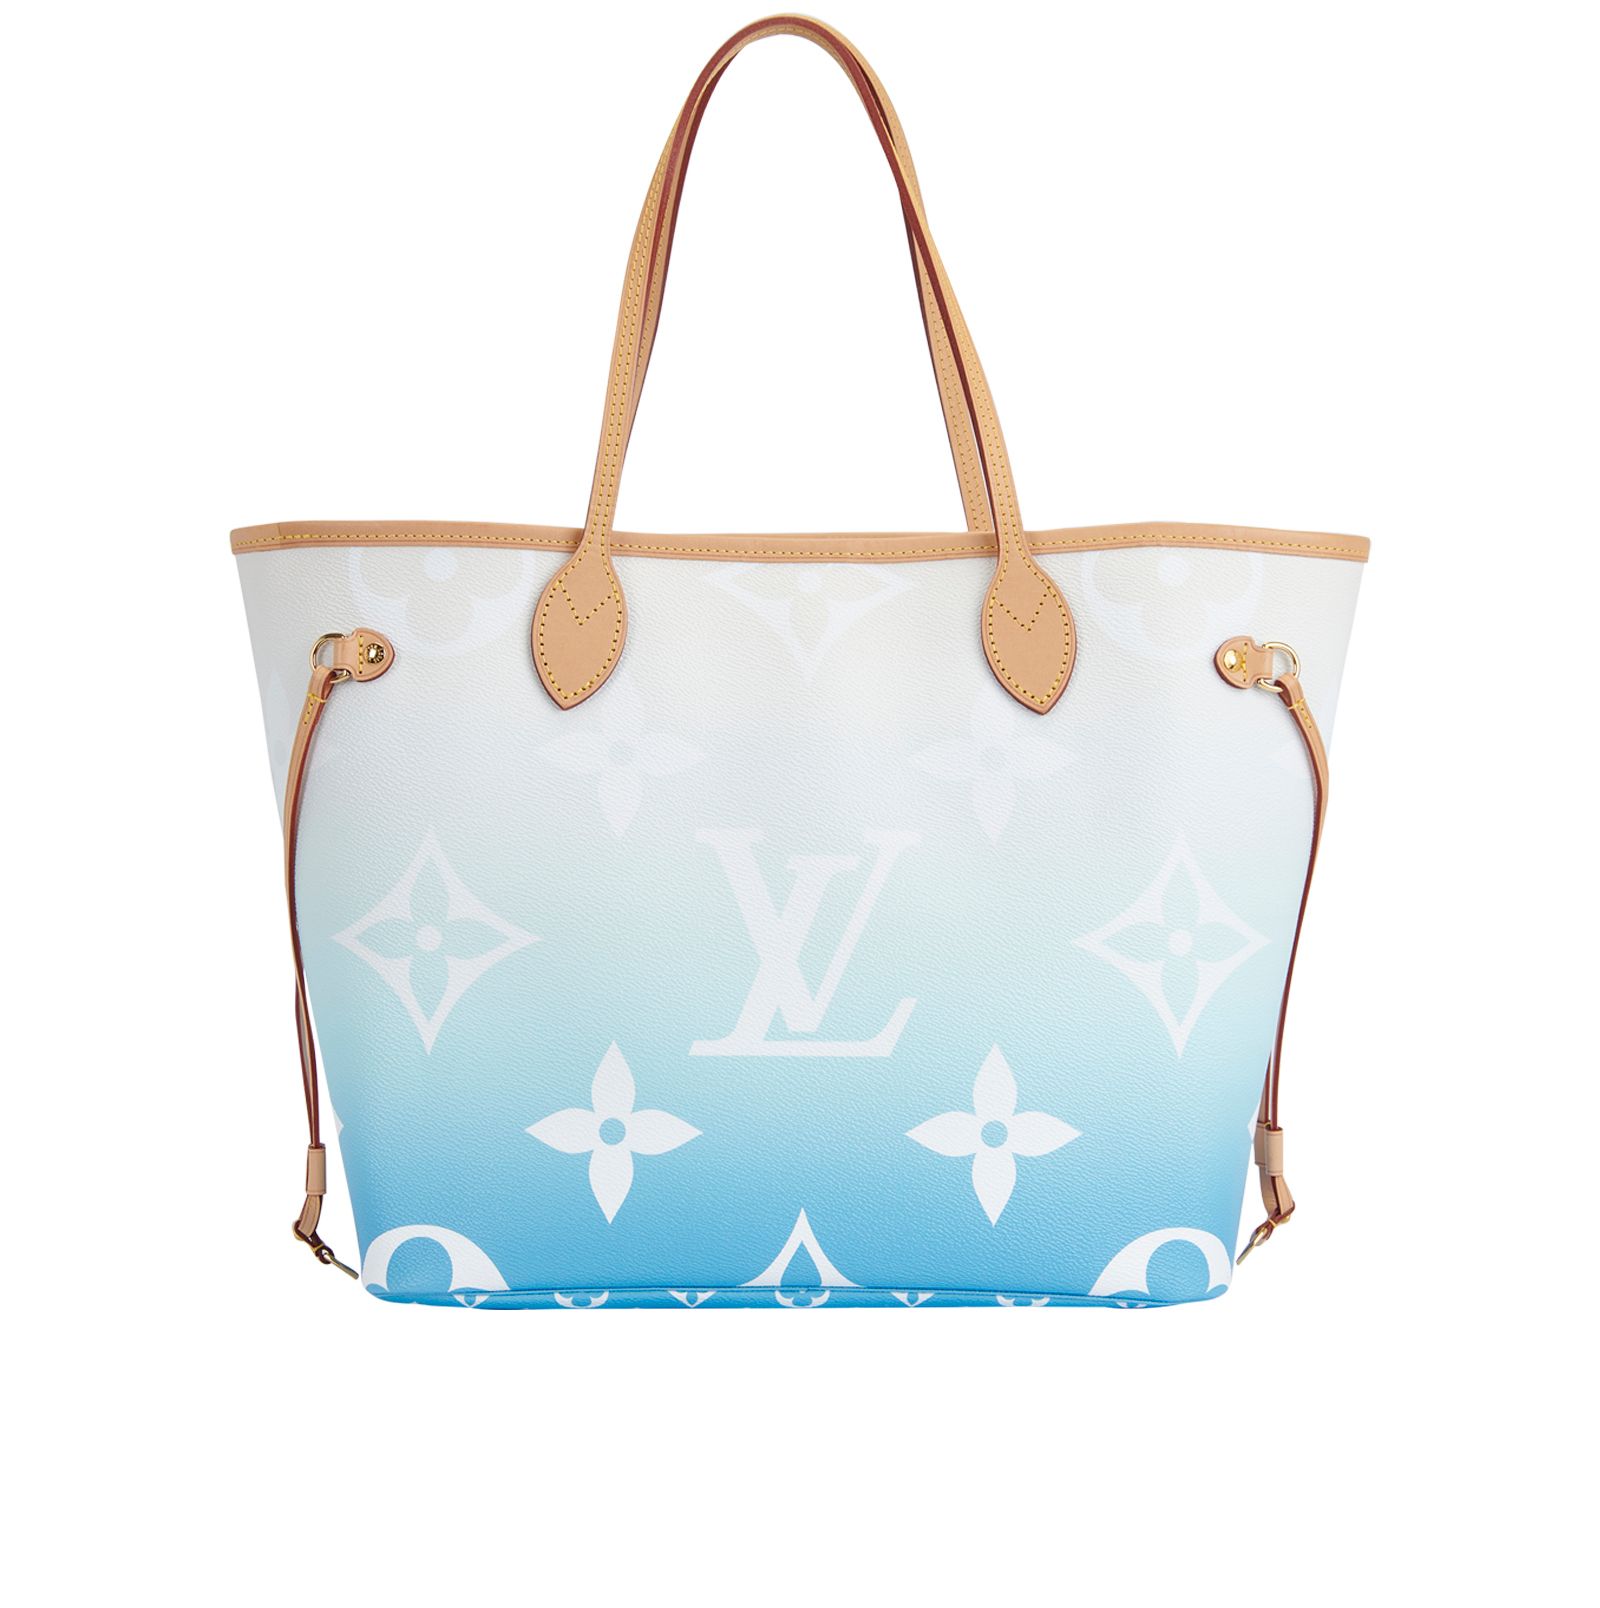 By The Pool Neverfull MM, Louis Vuitton - Designer Exchange